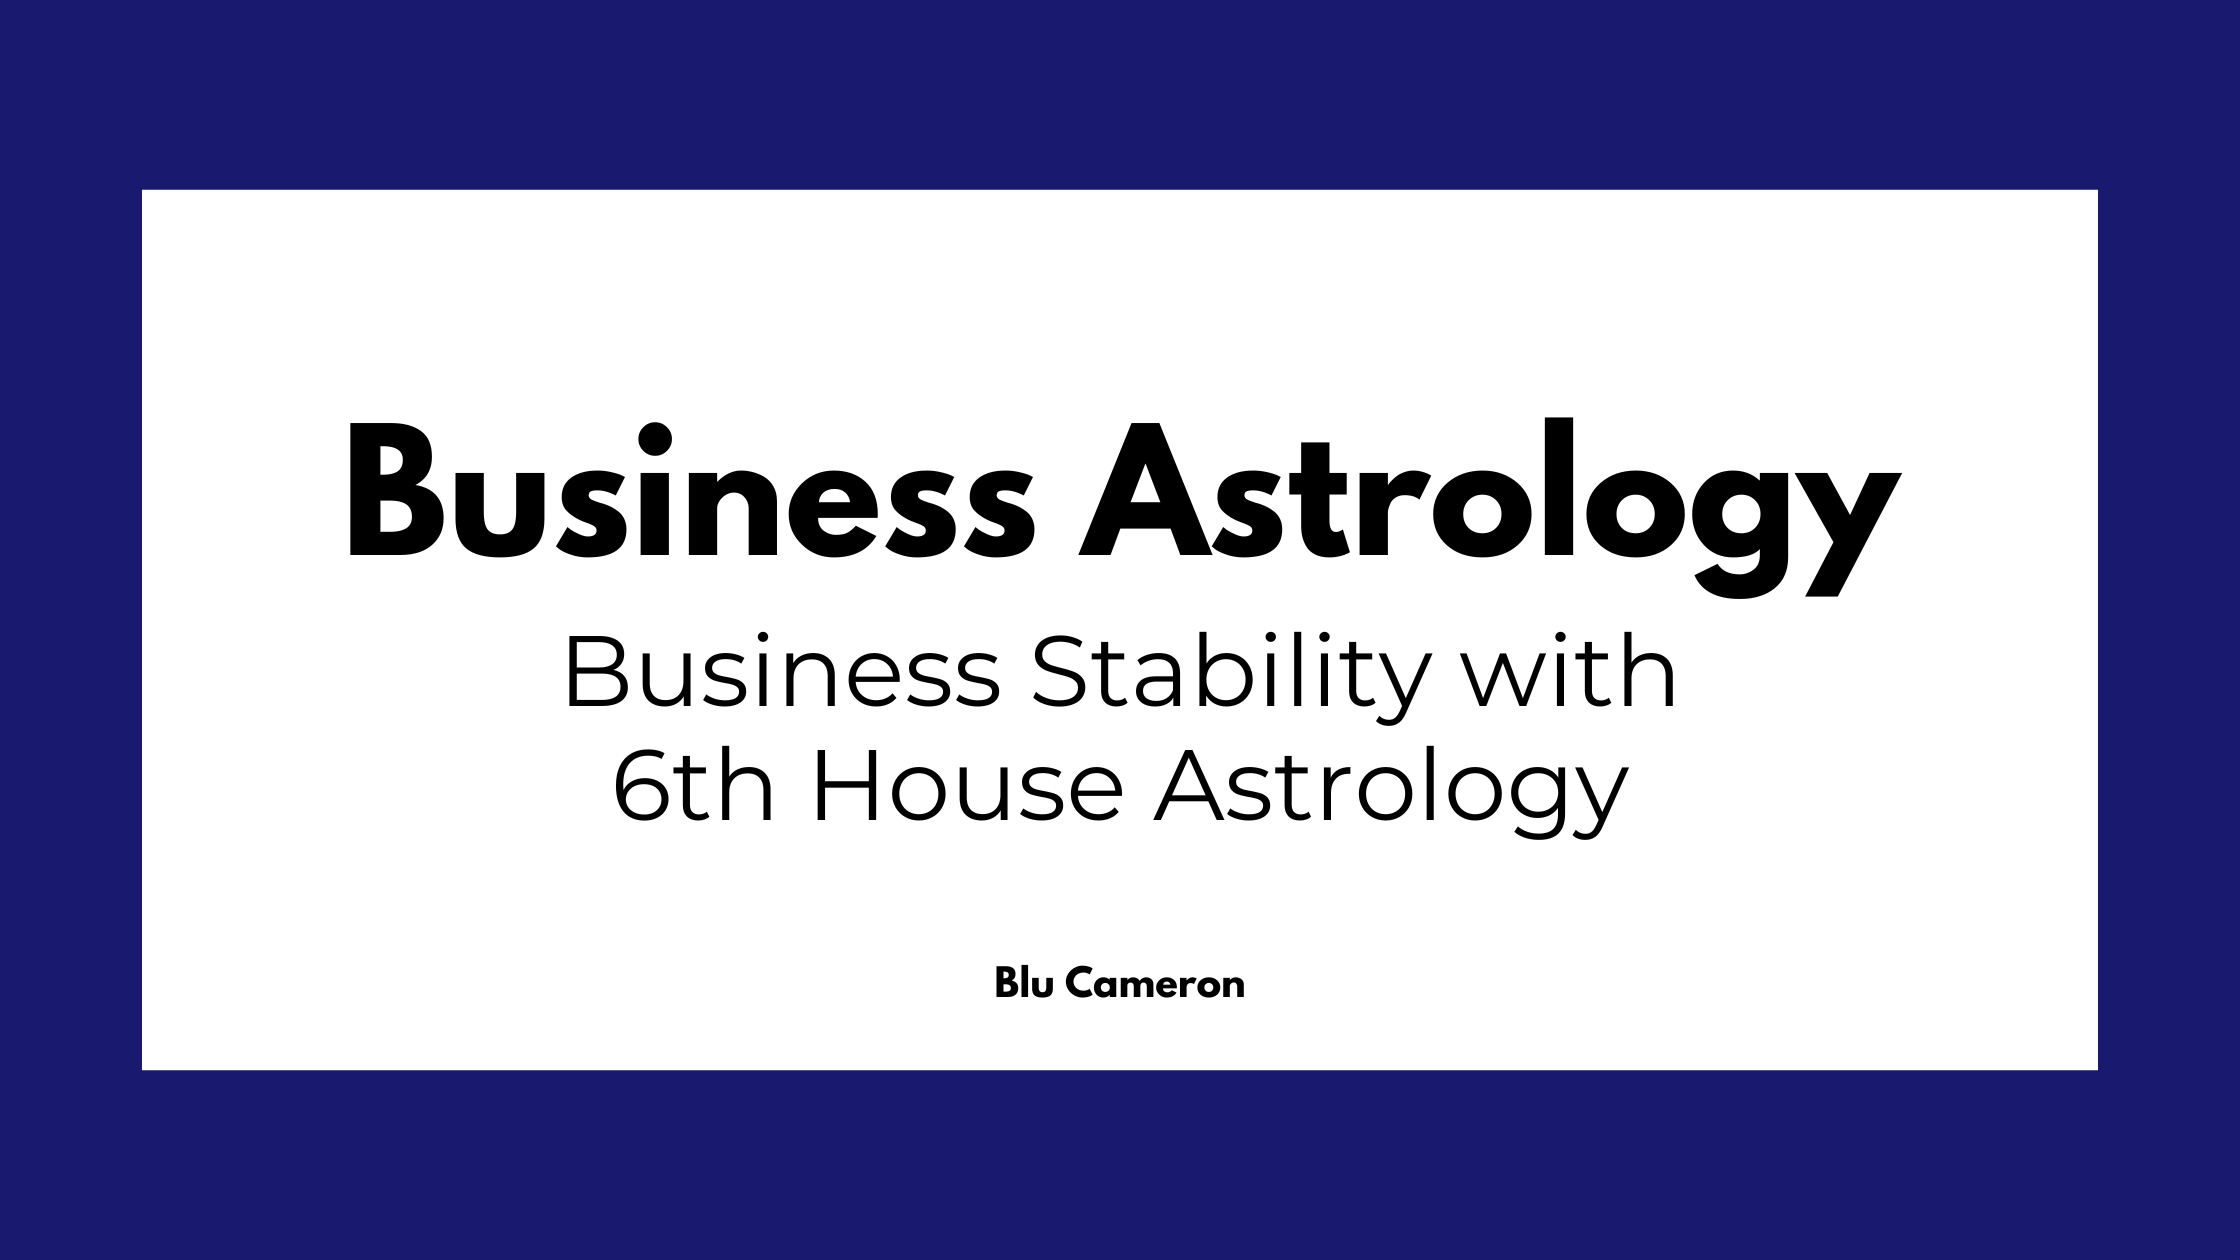 Black text against a white and purple background reads: "Business Astrology, Business Stability with 6th House Astrology"